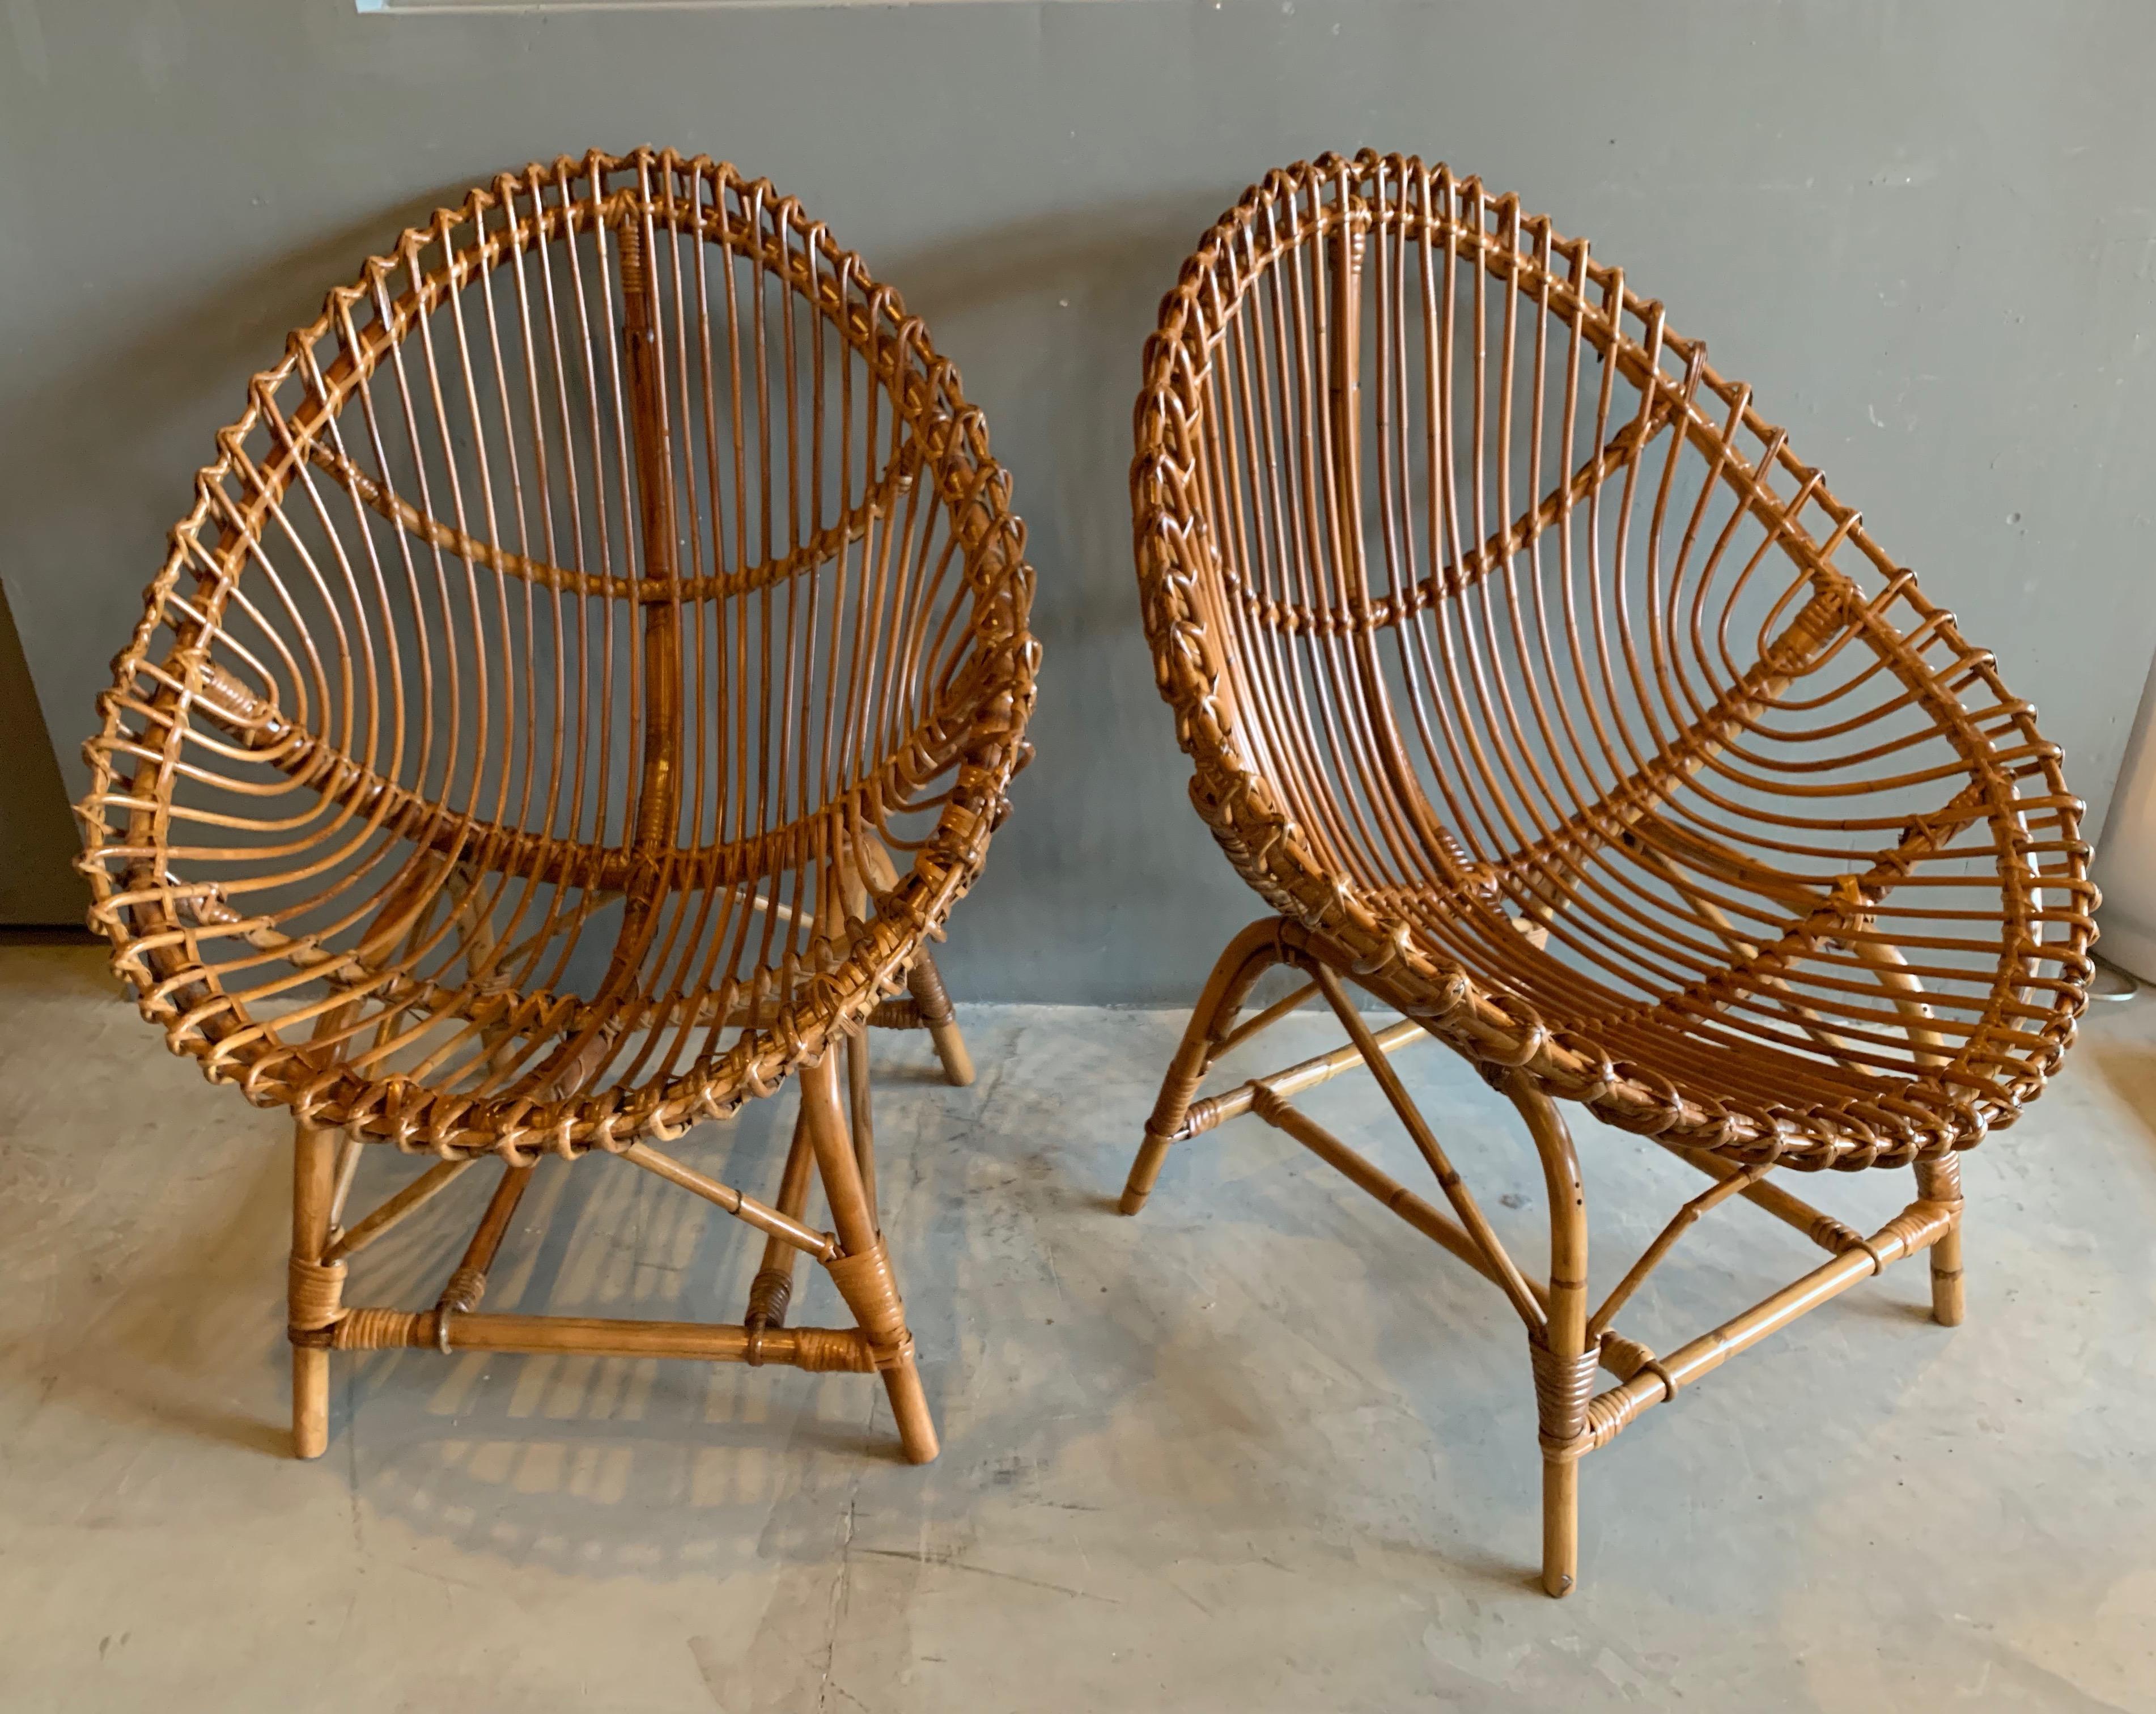 Elegant pair of rattan and bamboo chairs. Made in Italy. Very good vintage condition. Great scale.